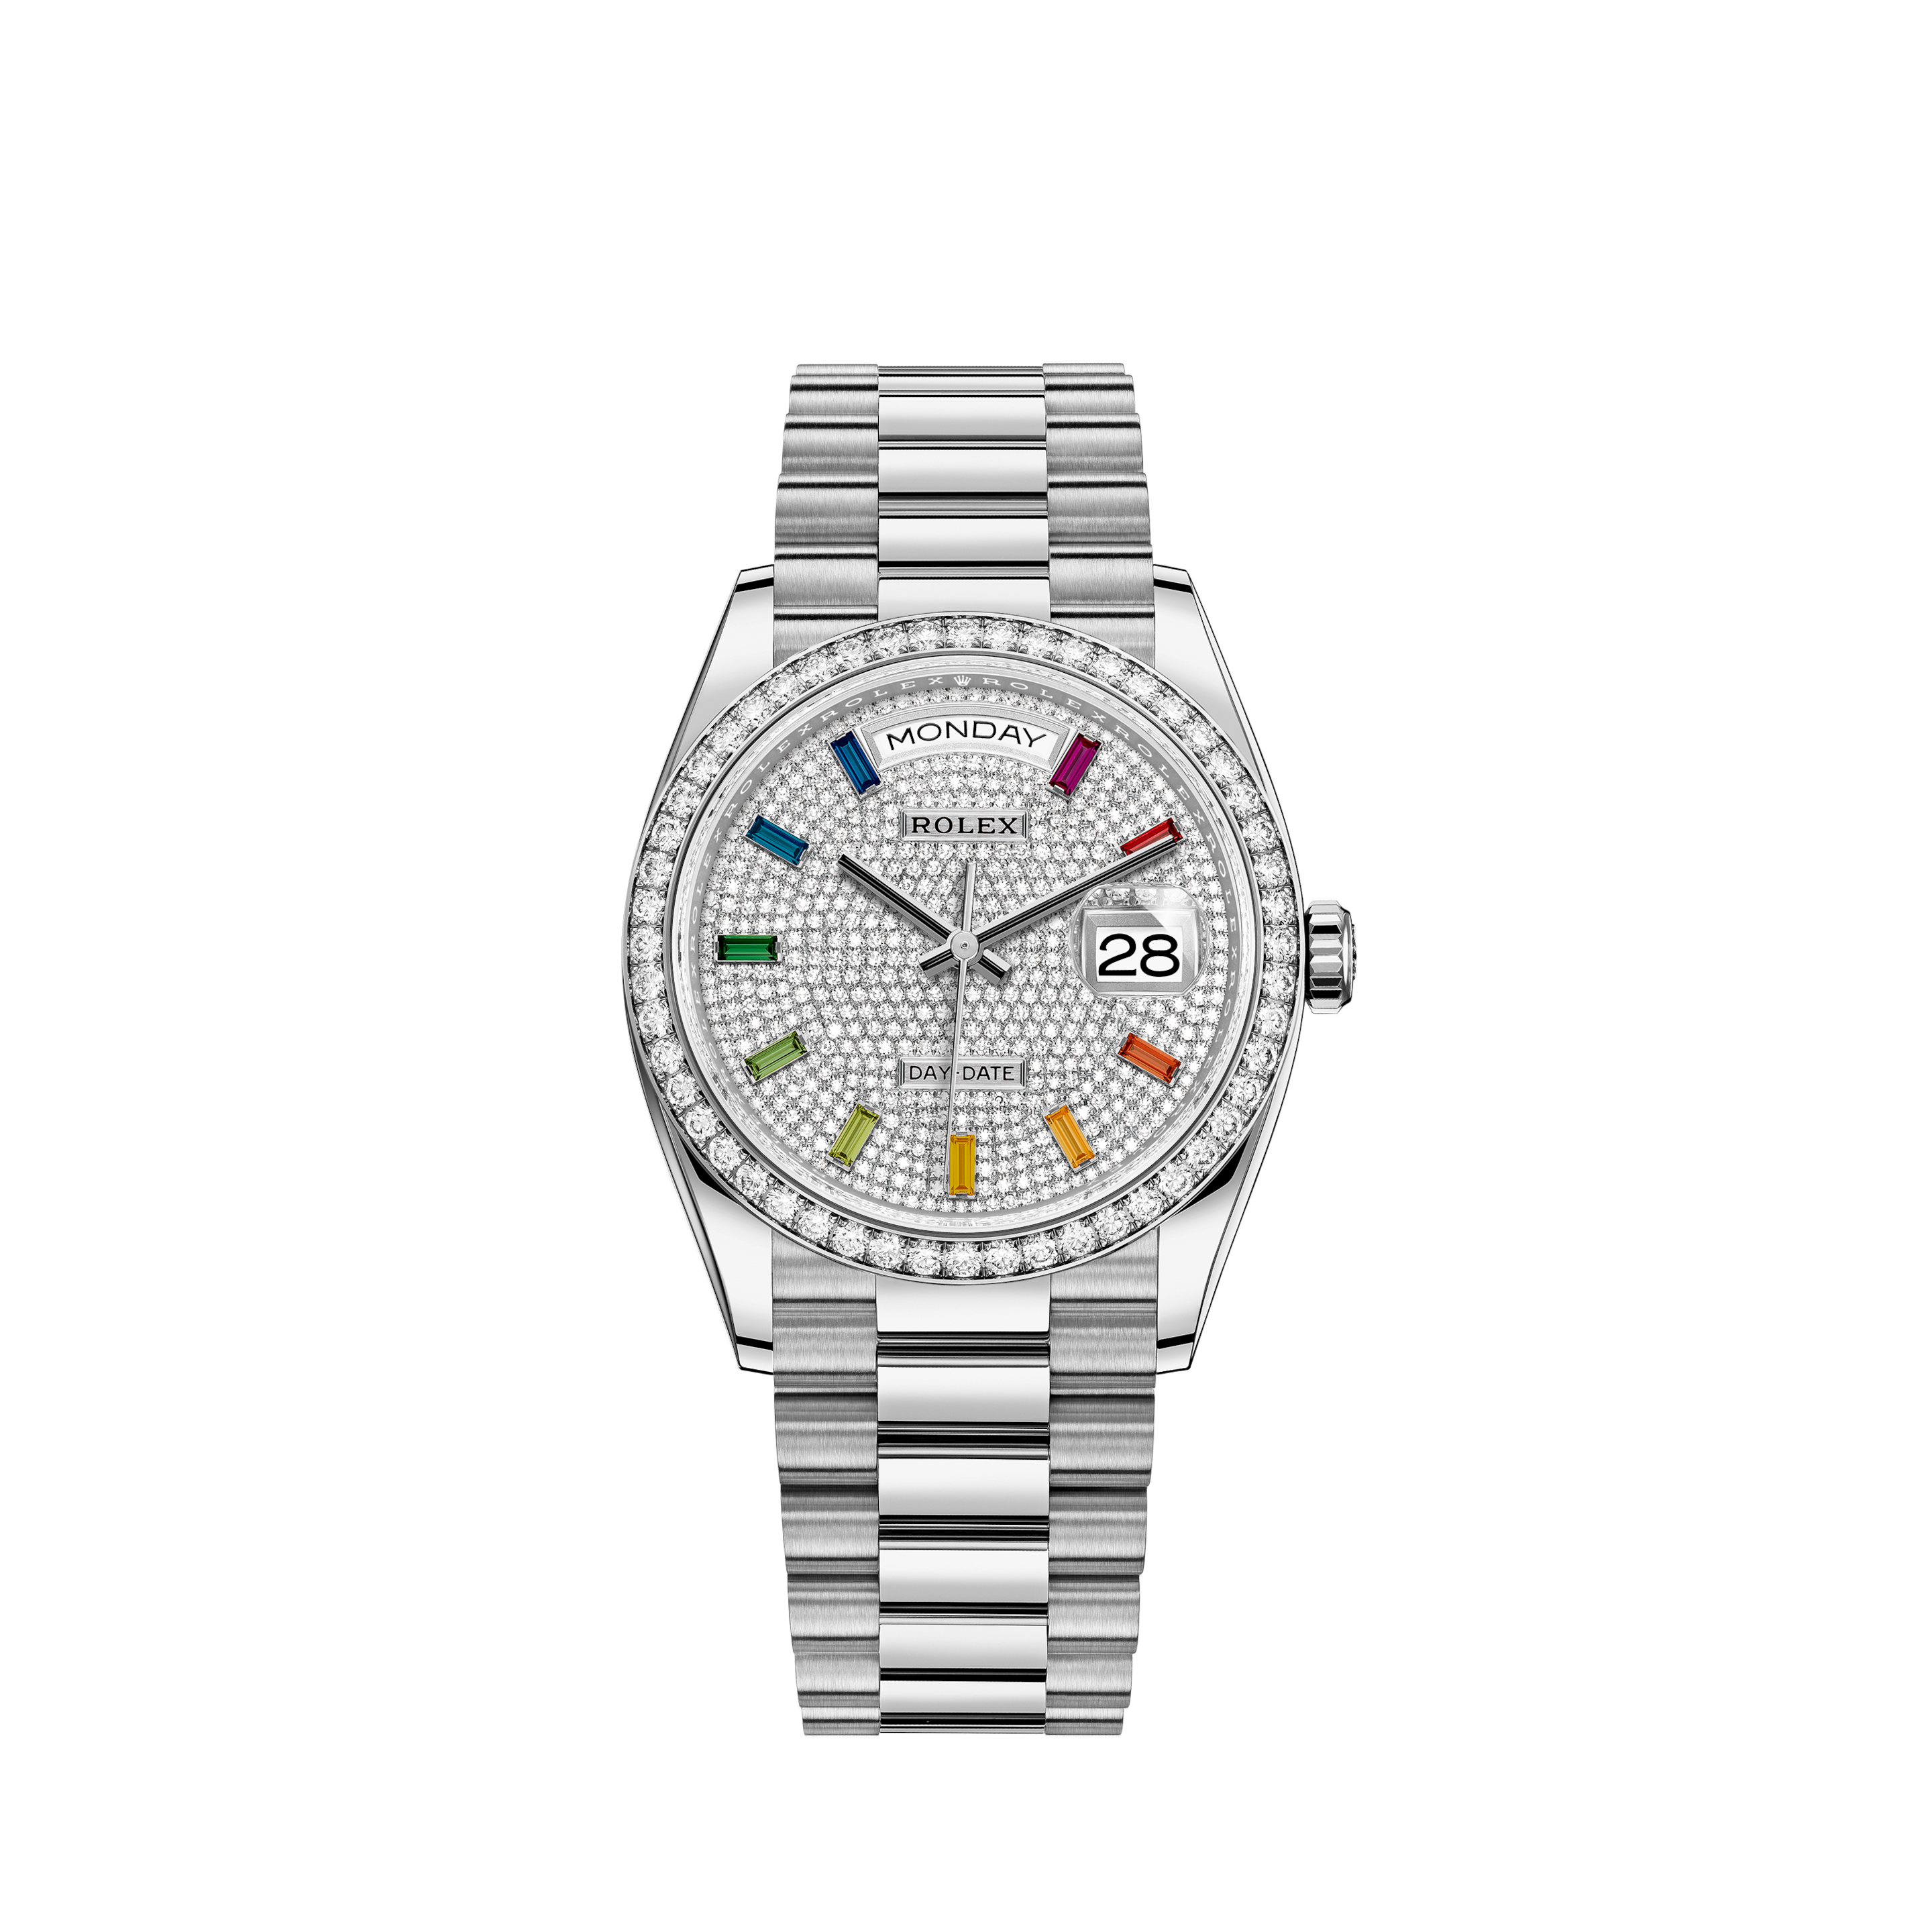 Rolex Datejust 41mm Steel and White Gold - Fluted Bezel 126334 DKRIORolex Datejust 41mm Steel and White Gold - Fluted Bezel 126334 SIJ